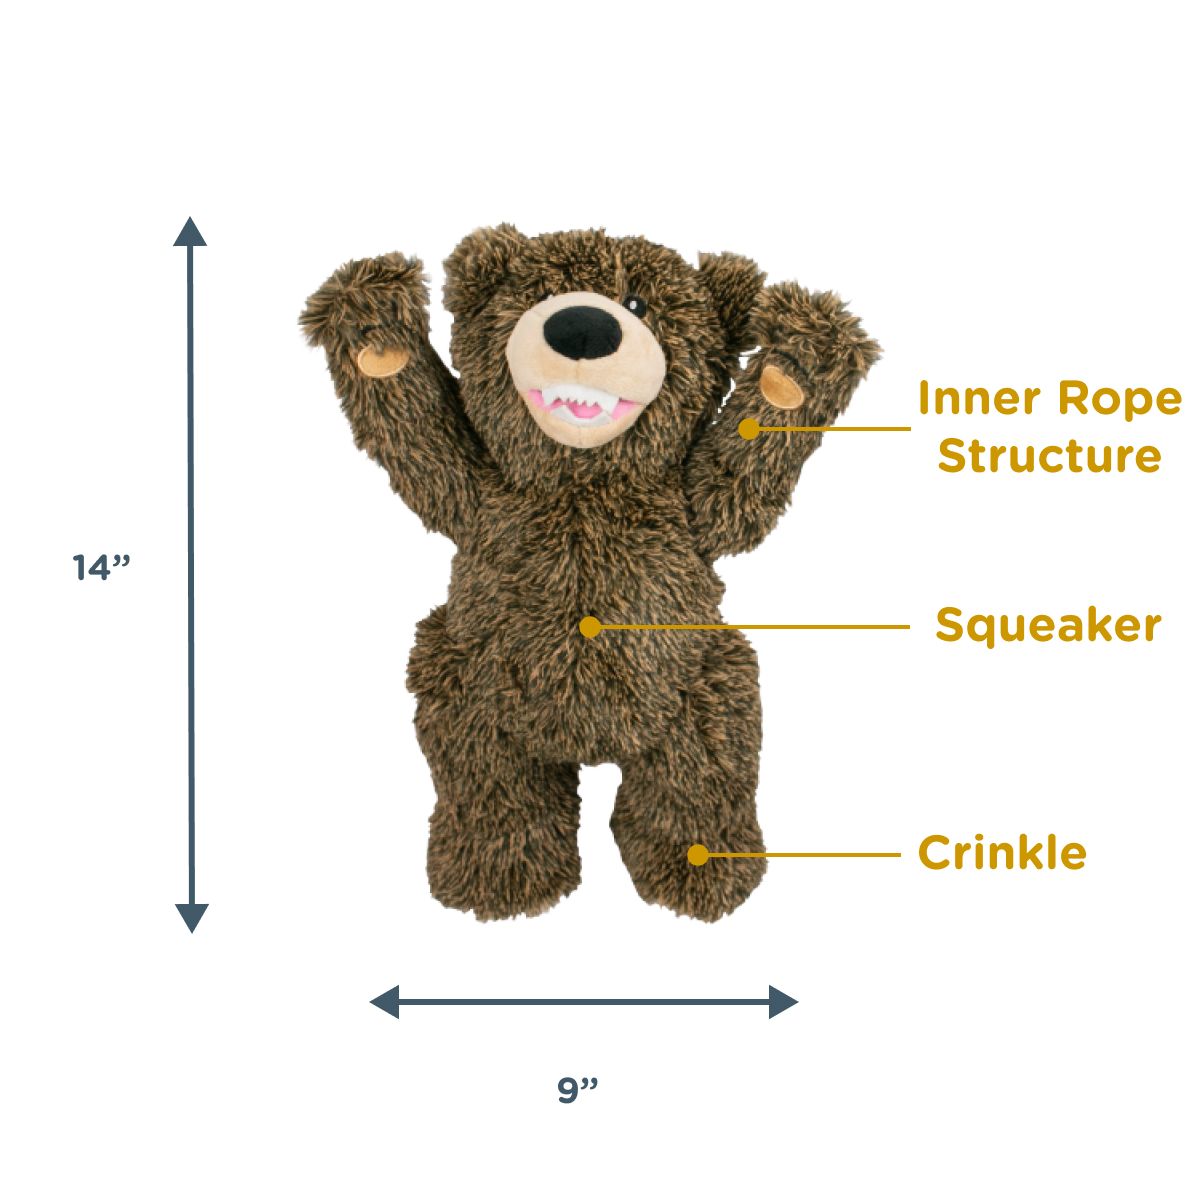 Rope Body Grizzly Bear